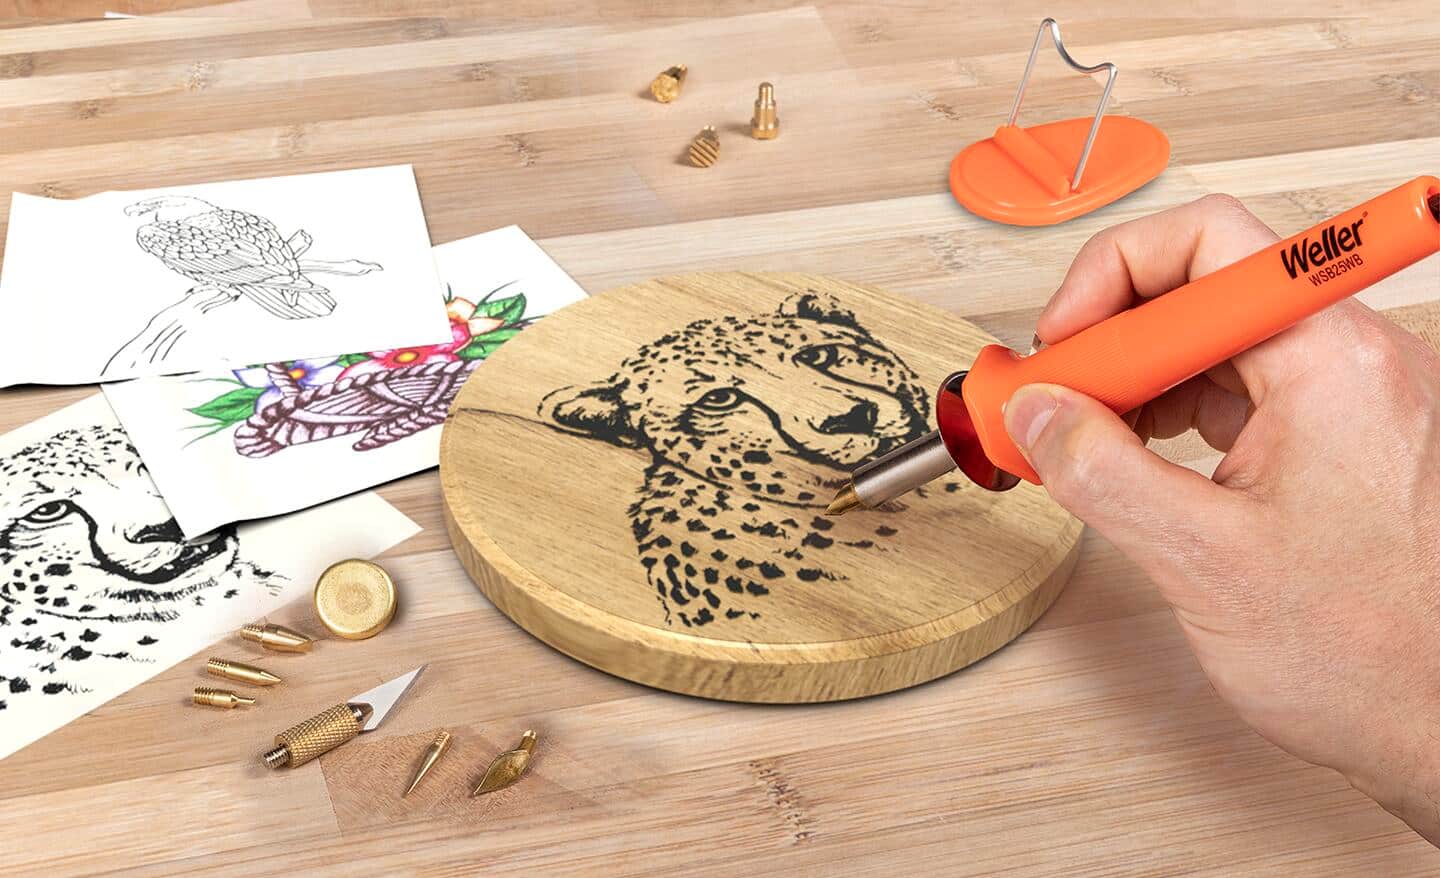 Pyrography, wood burning, with a soldering iron.